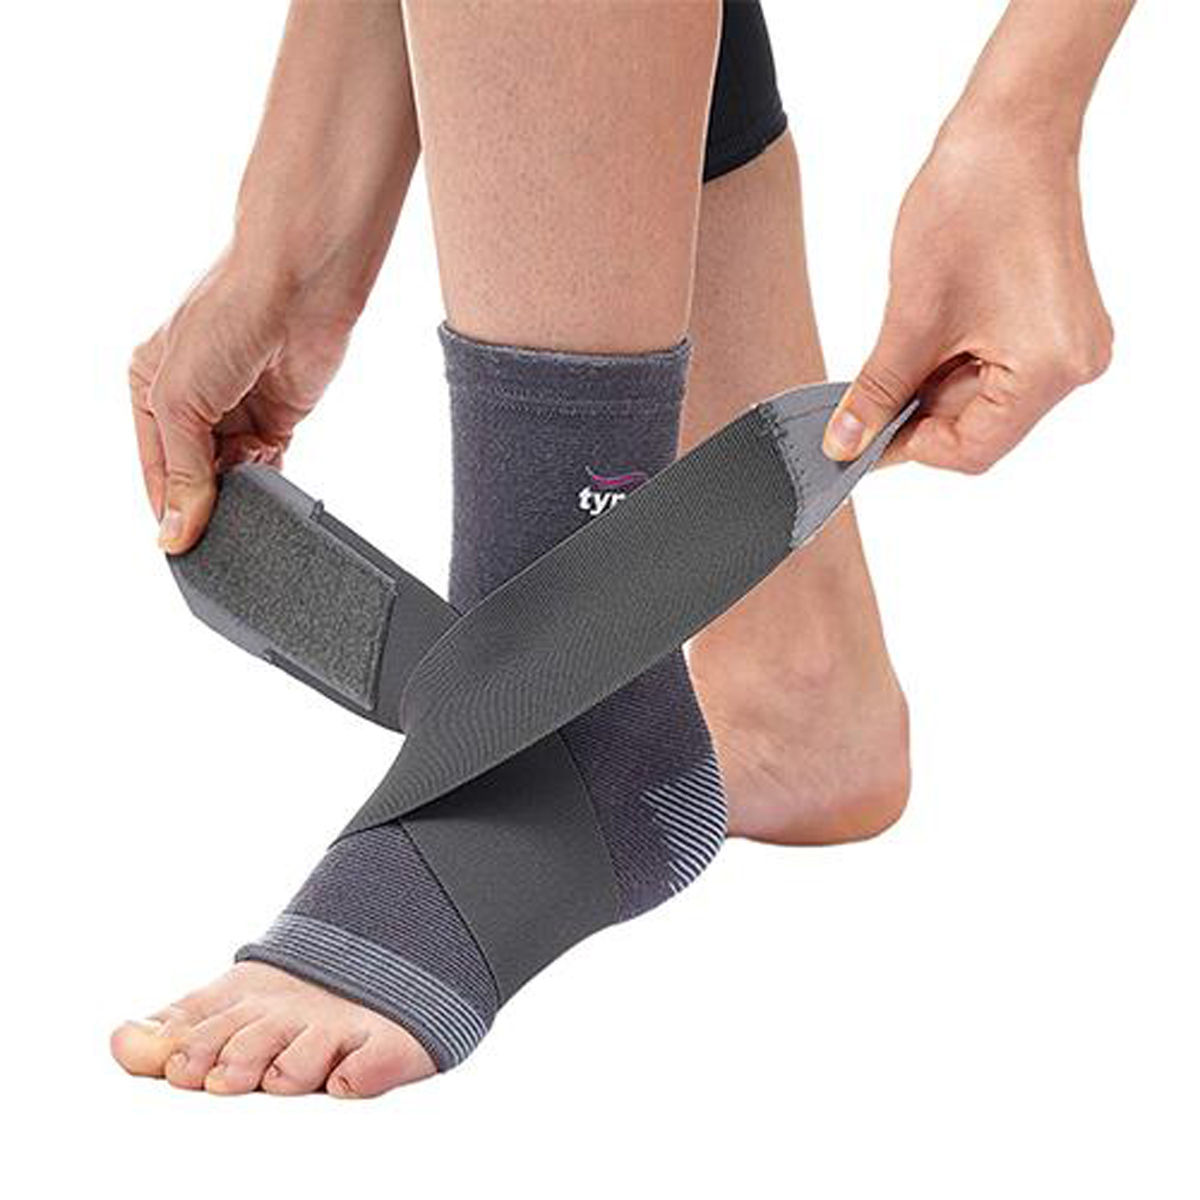 Tynor Ankle Binder Single Large, 1 Count, Pack of 1 